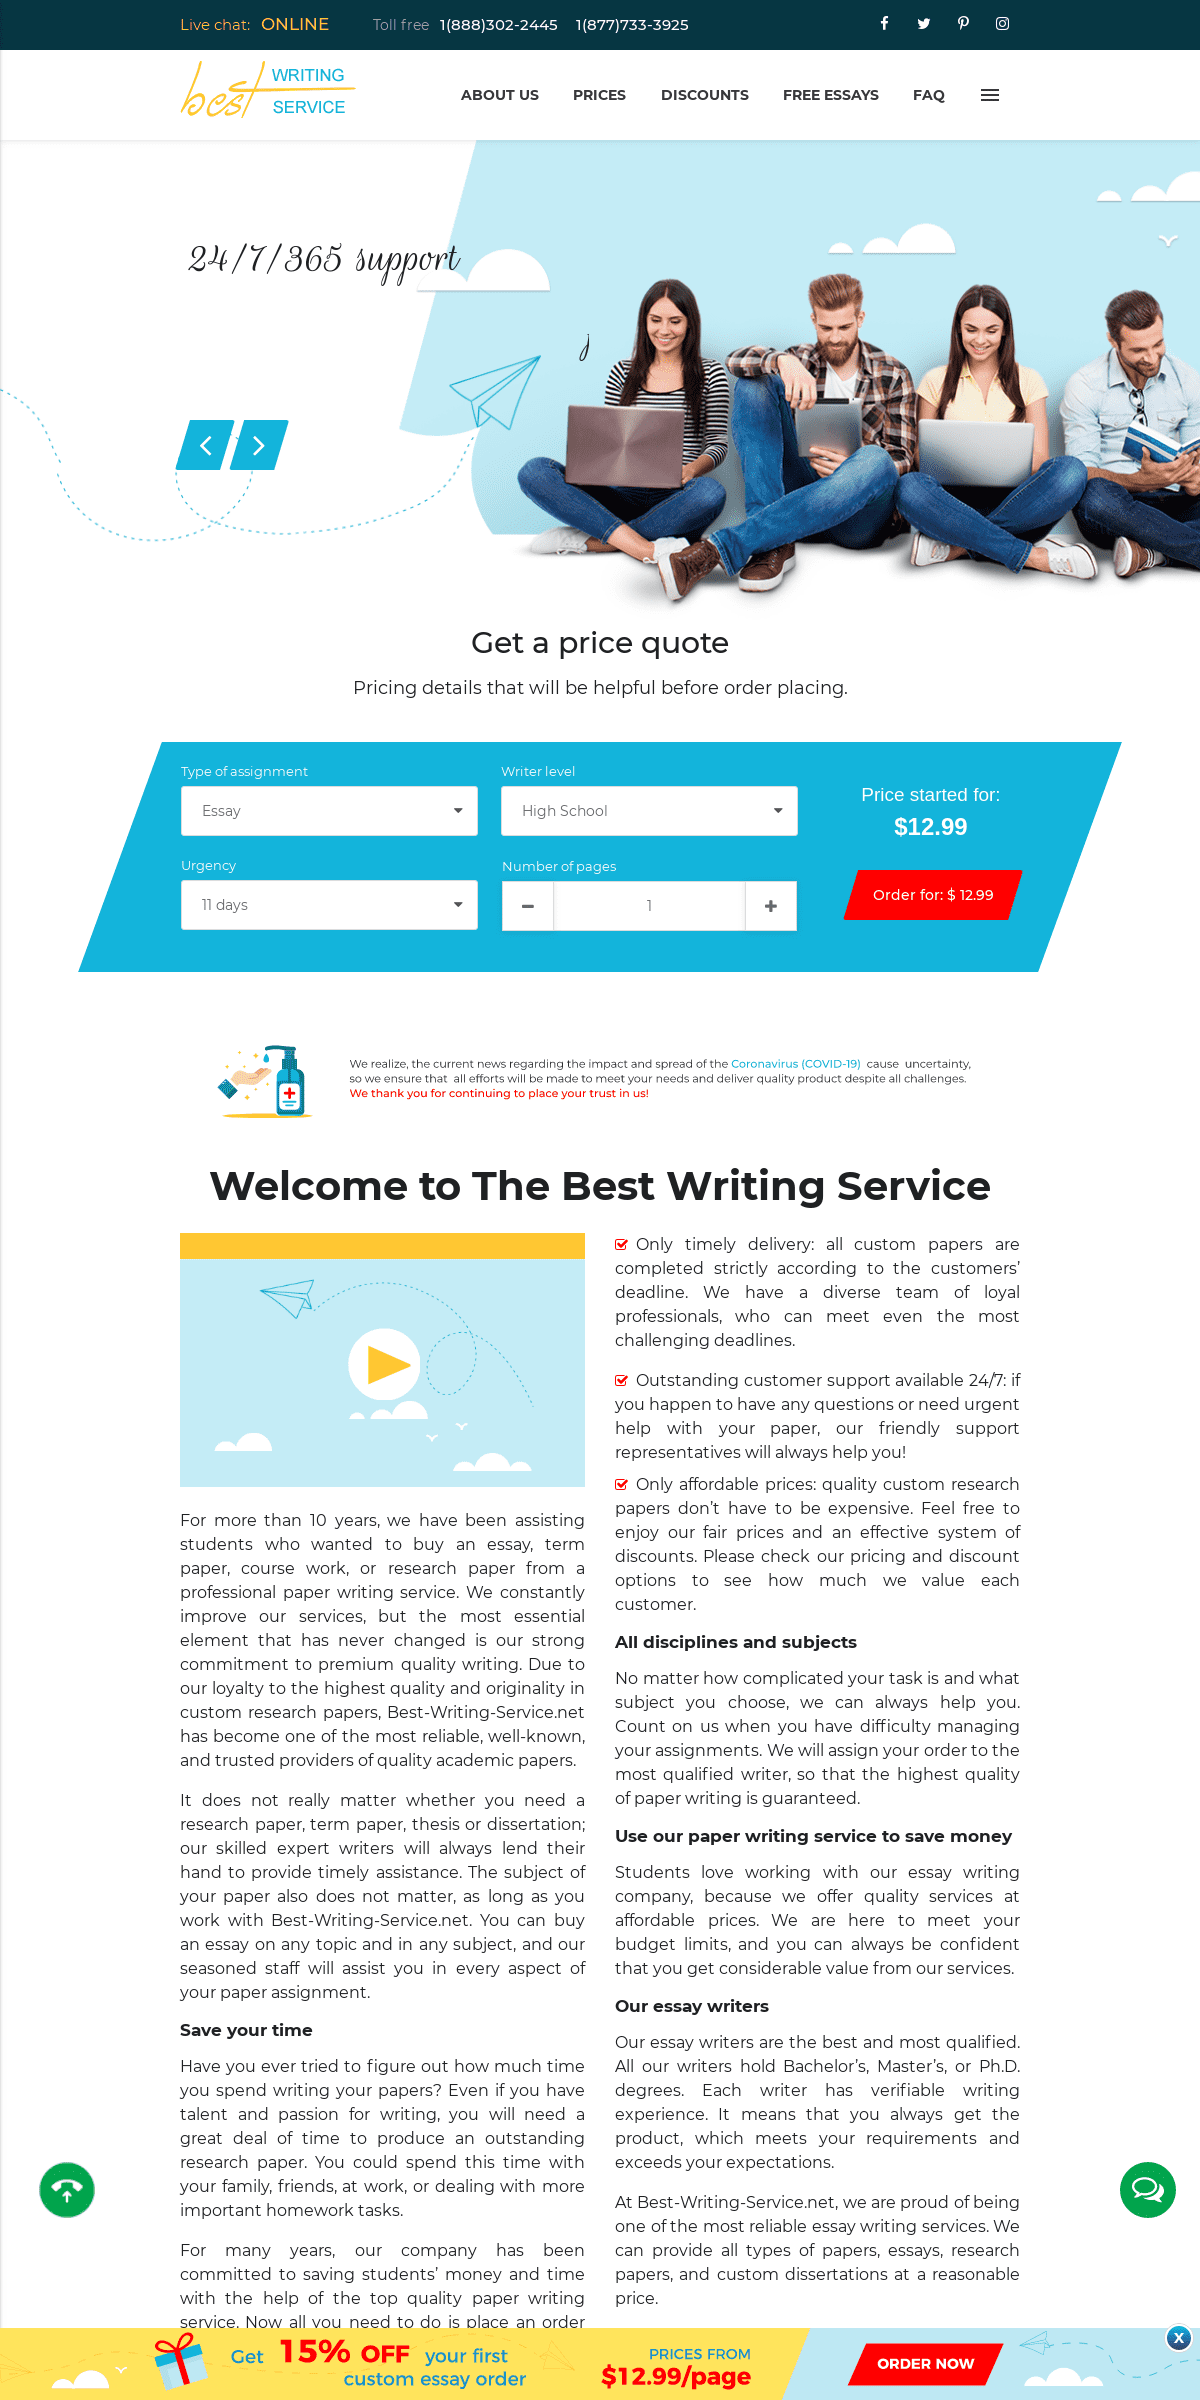 A complete backup of best-writing-service.net